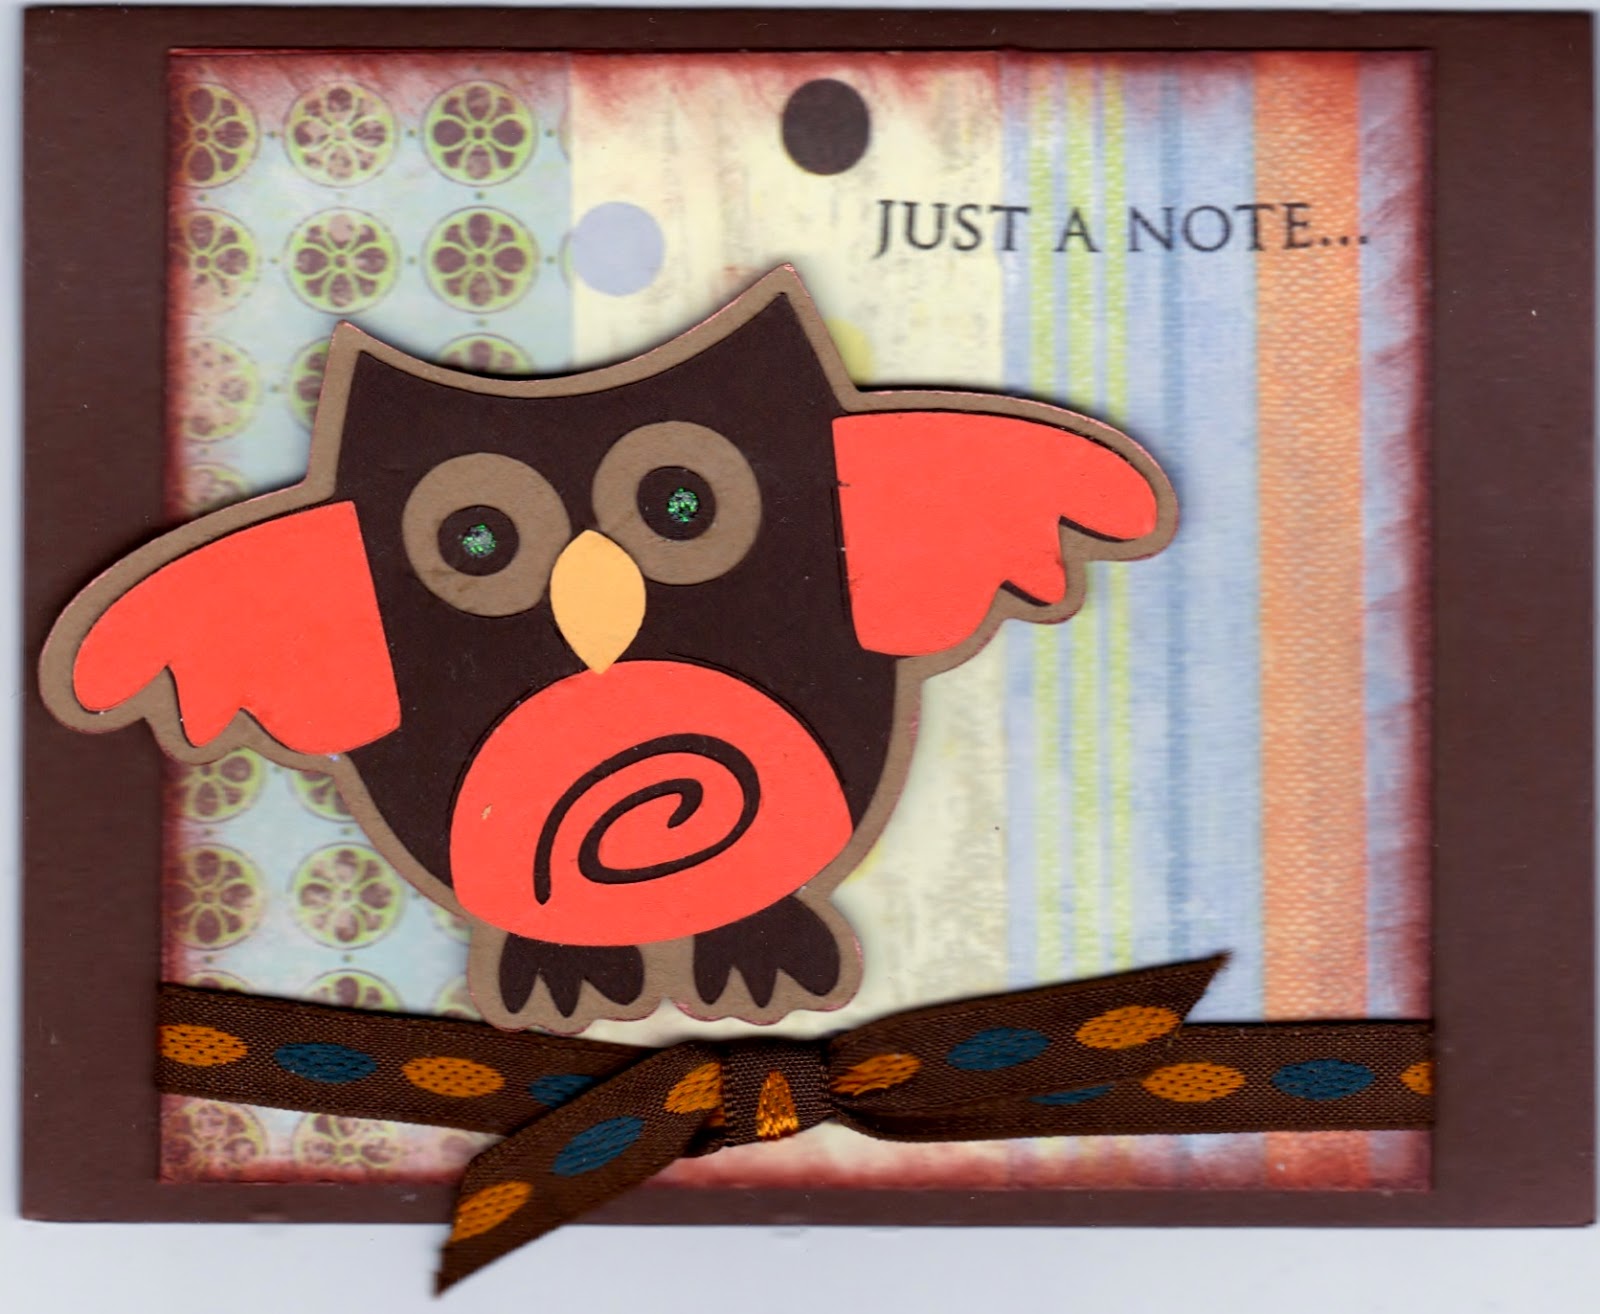 https://www.etsy.com/listing/209653504/just-a-note-owl-handmade-blank-supply